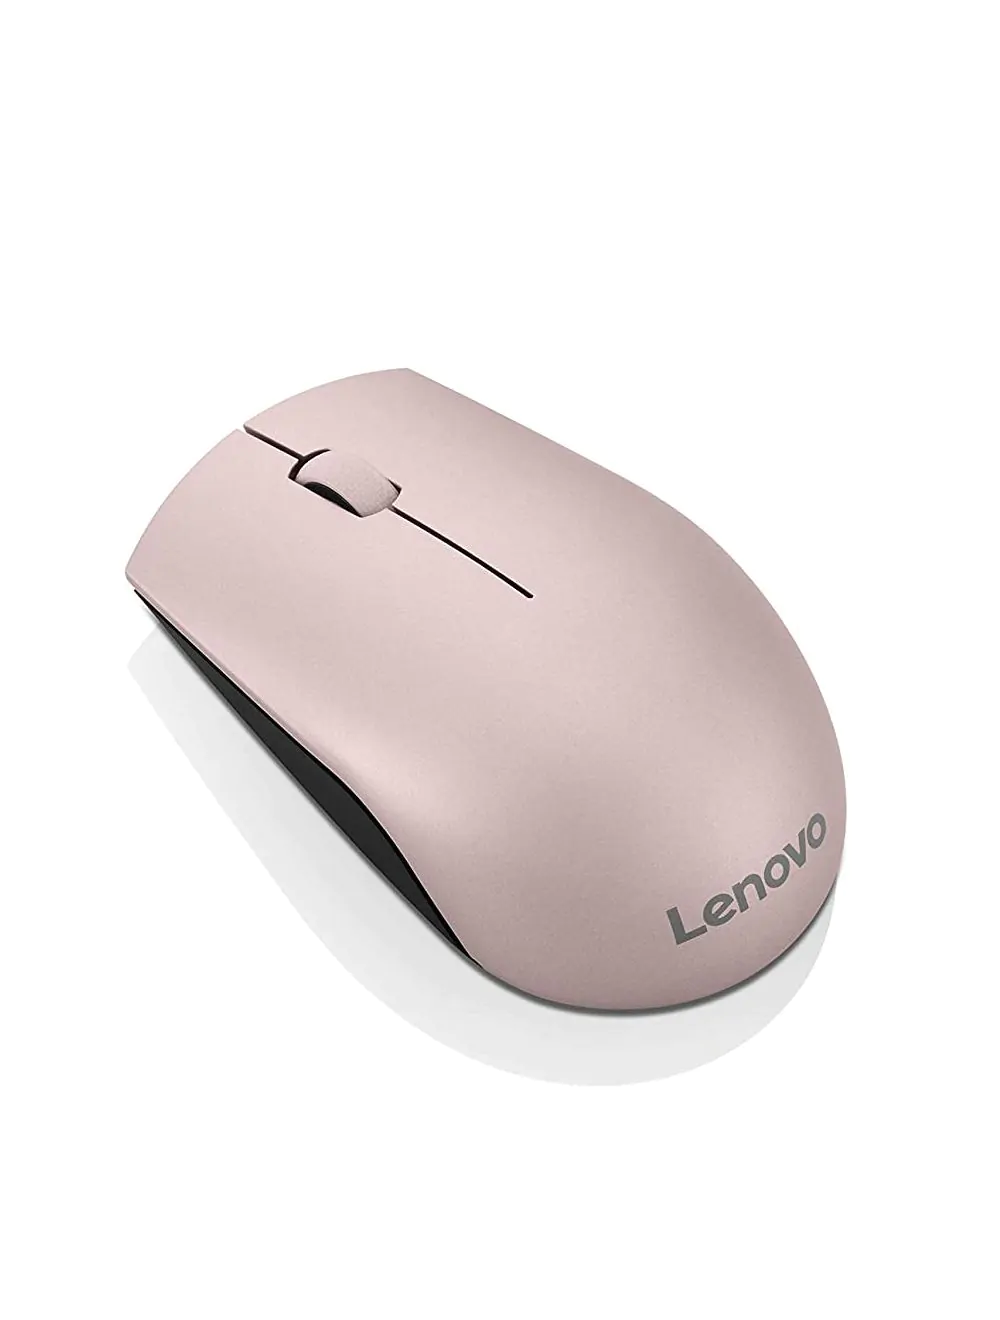 Lenovo GY50T83718 520 Wireless Mouse (Sand Pink)